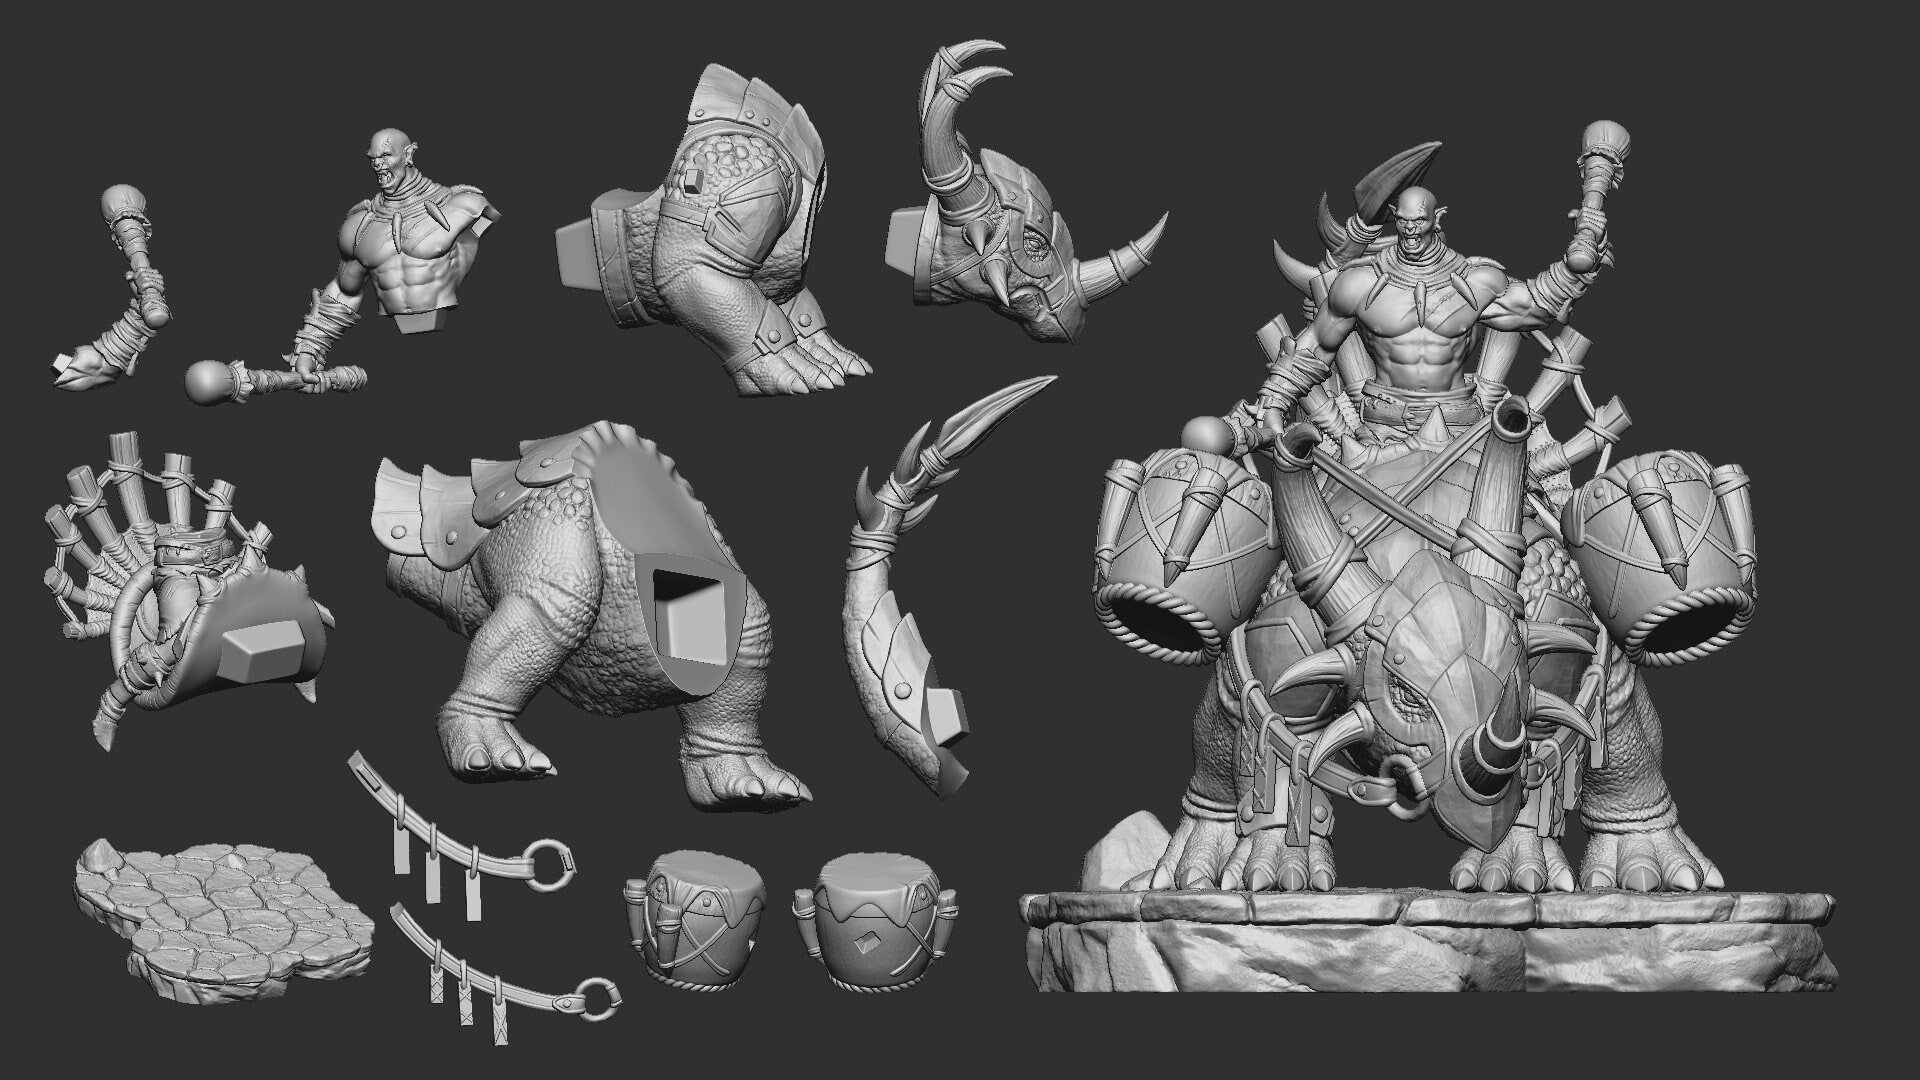 Orc Rider With Beast | Resin 3D Printed Miniature | White Werewolf Tavern | RPG | D&D | DnD